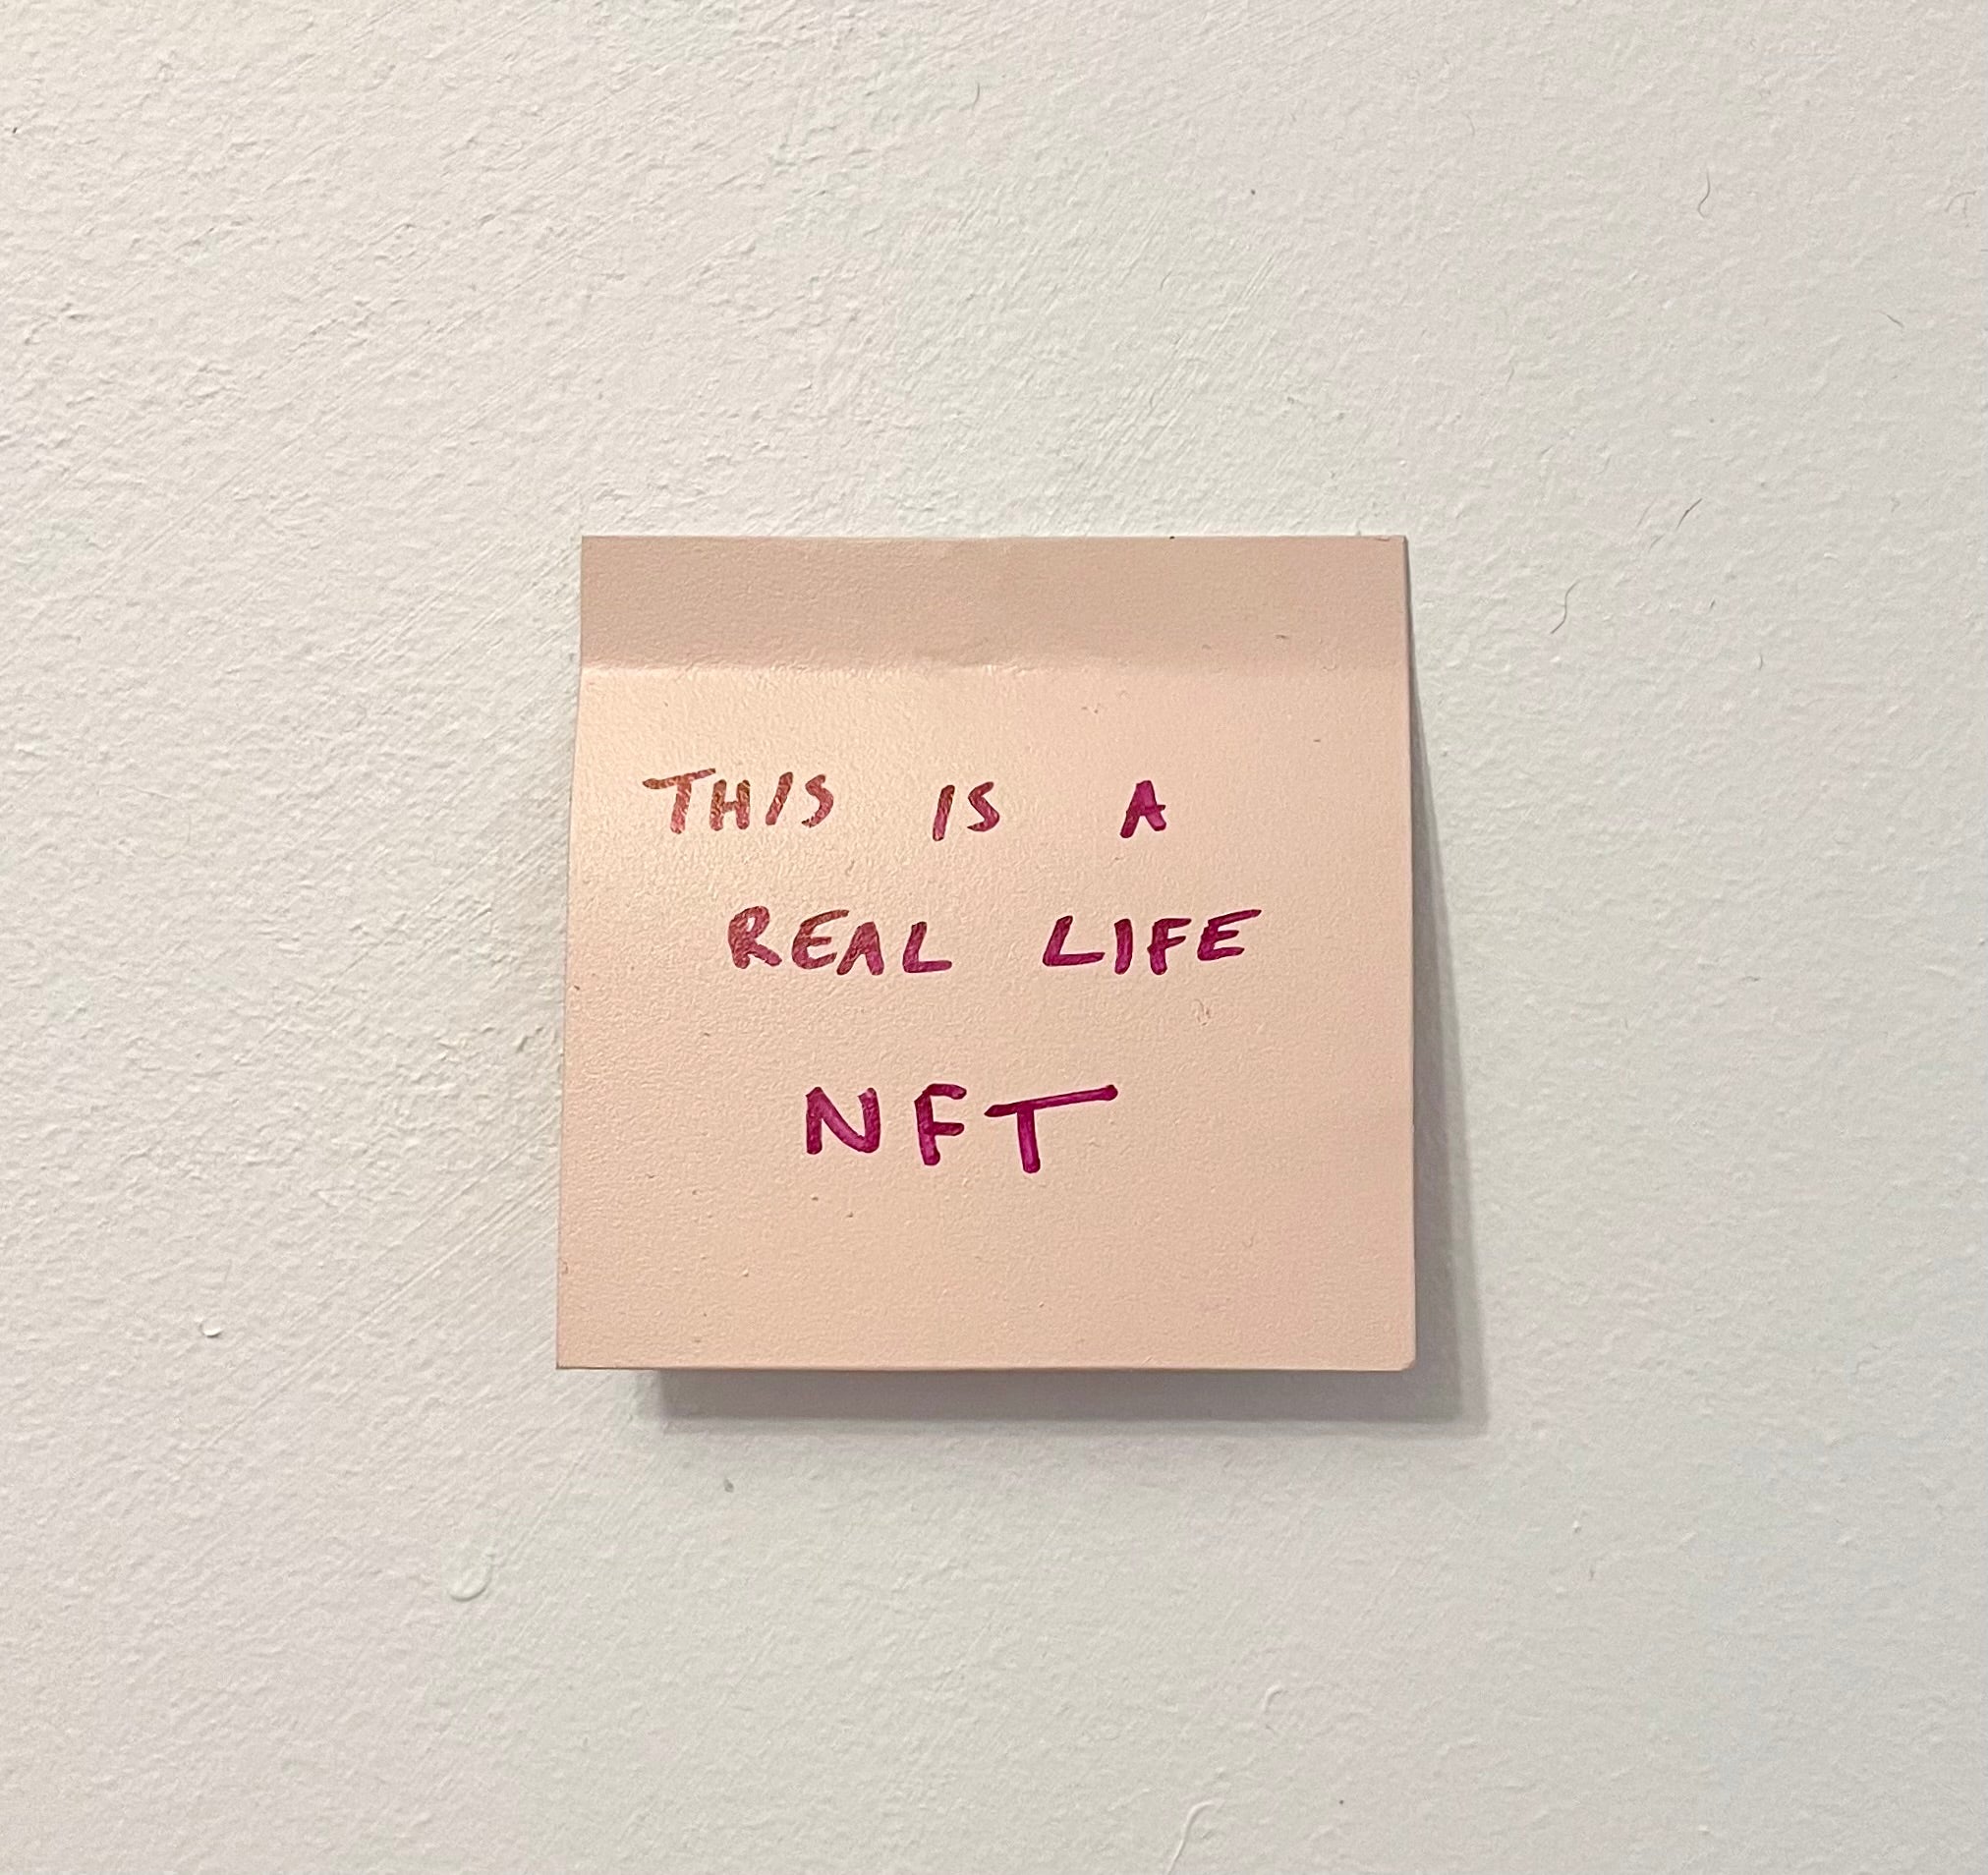 Stuart Lantry, "This is a real life NFT" SOLD